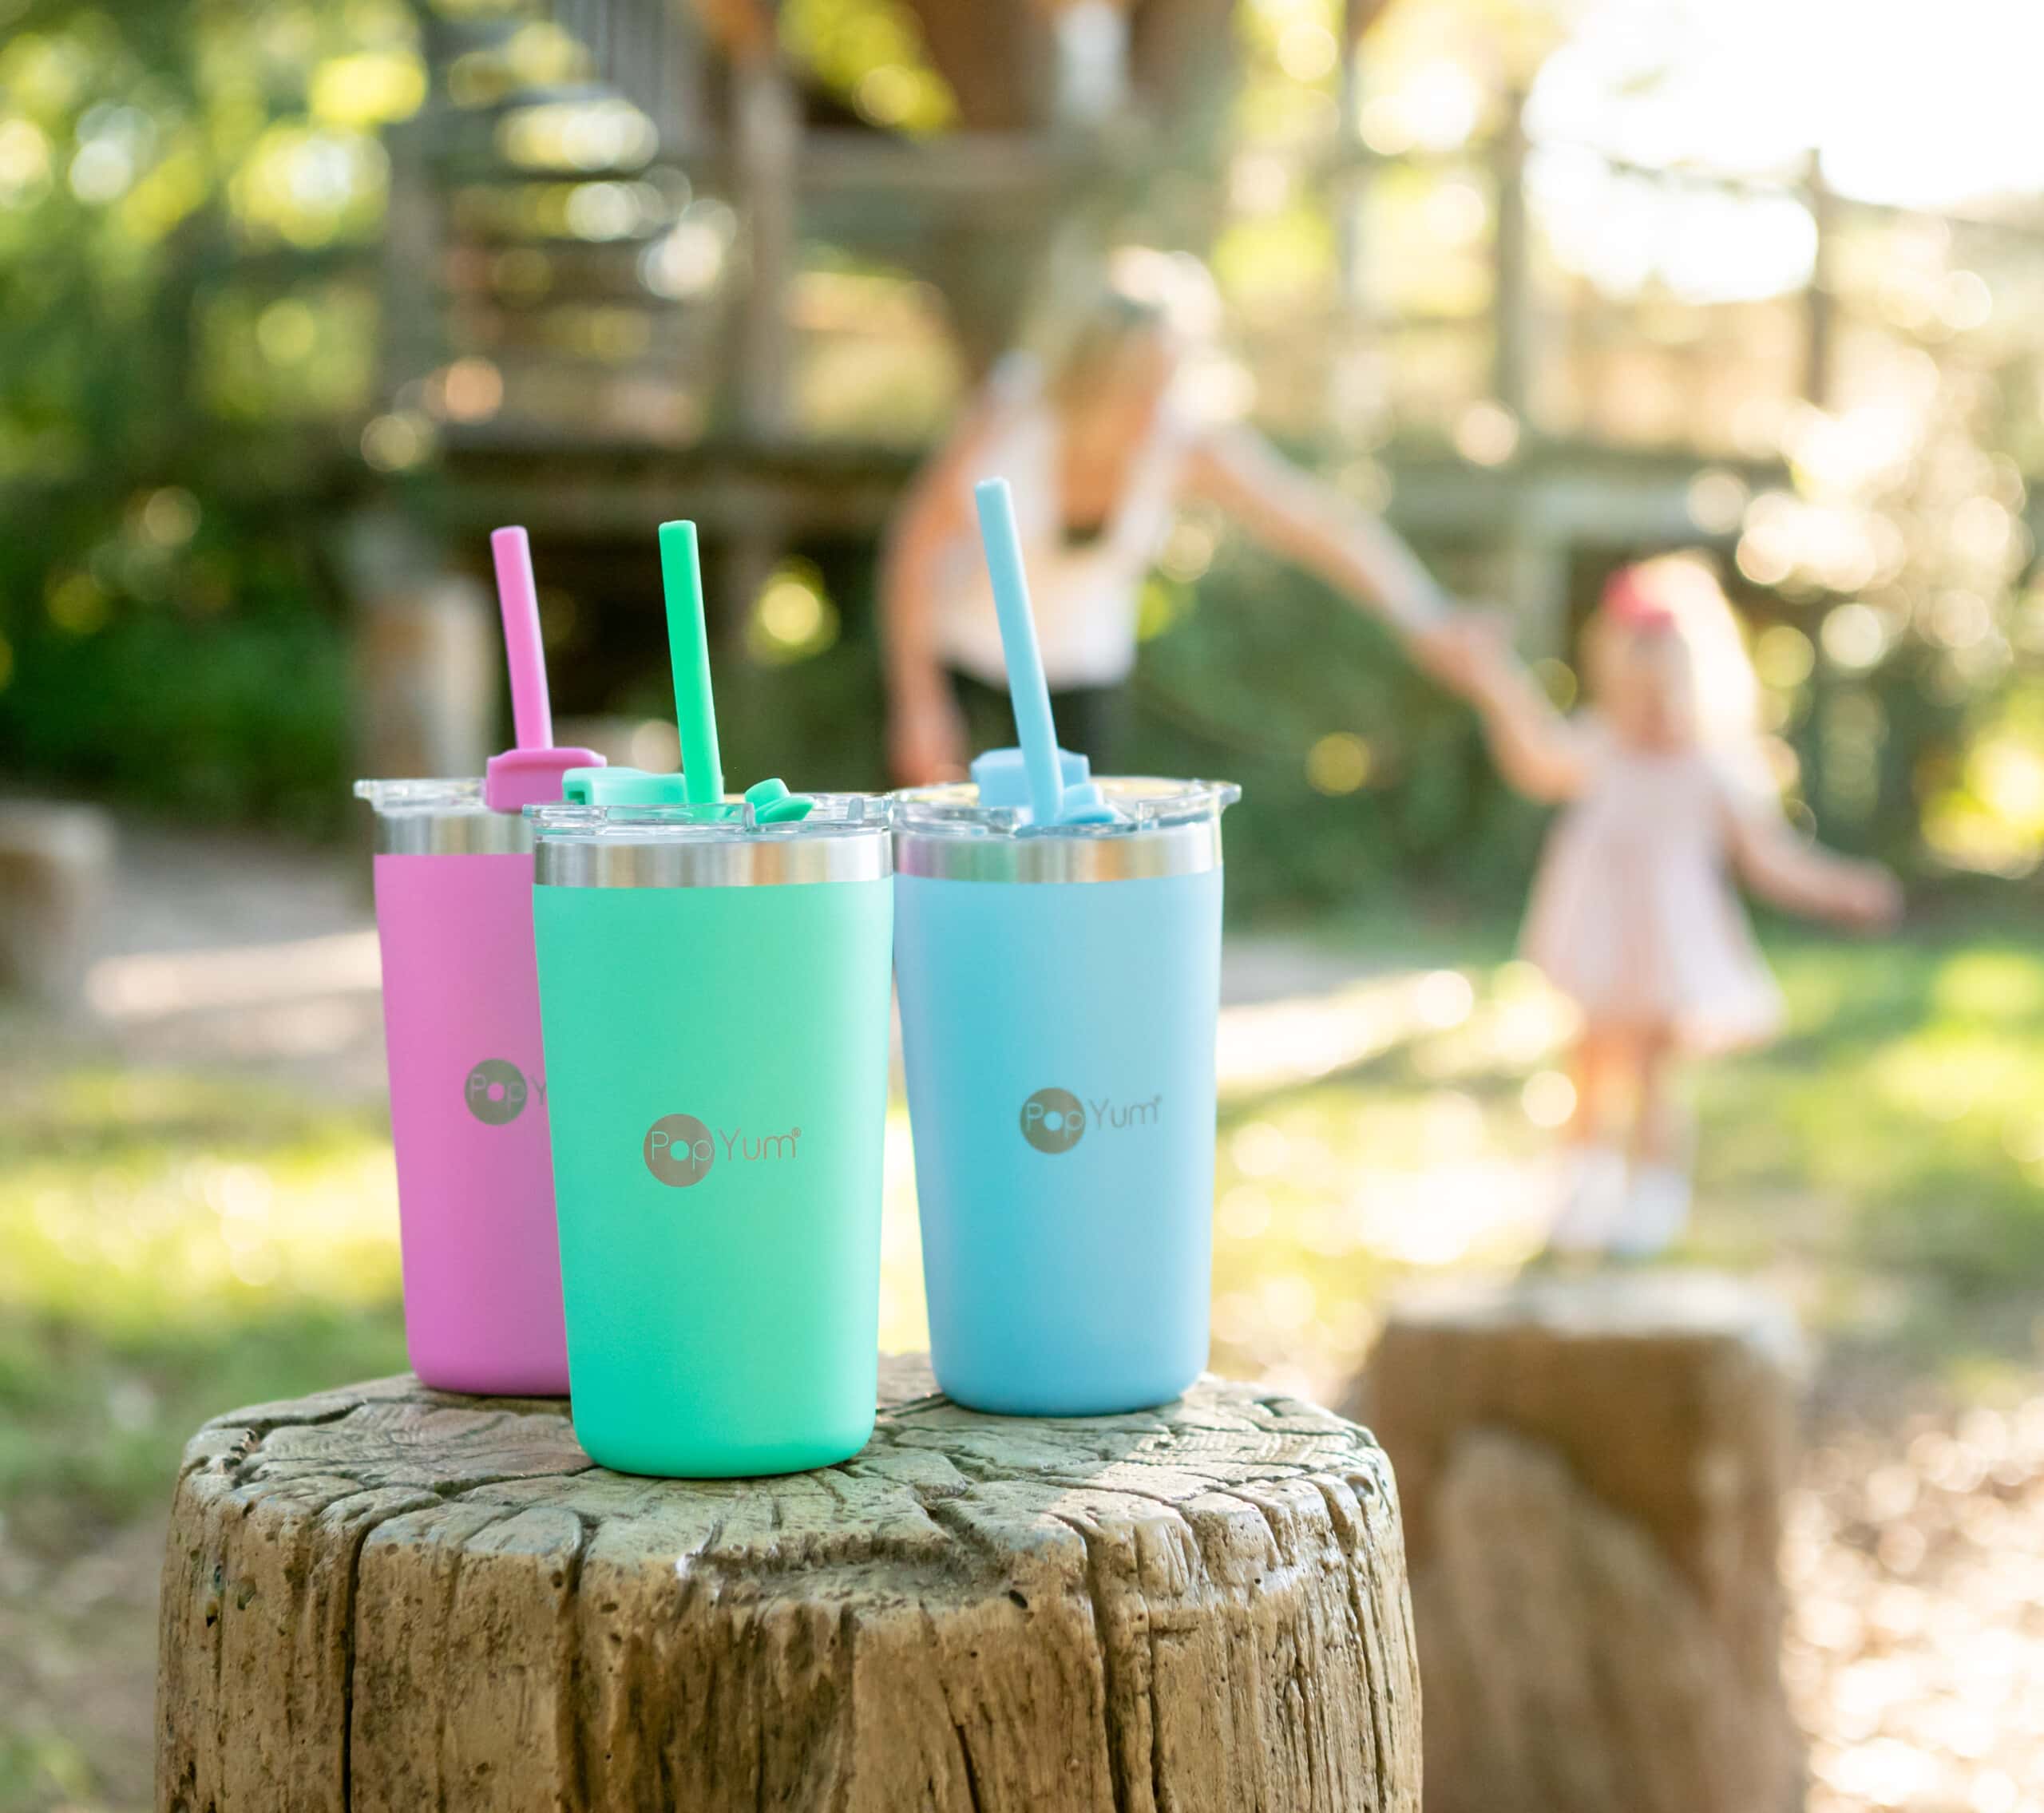 PopYum 13oz Kids Cups with mom and daughter playing outside in the background.